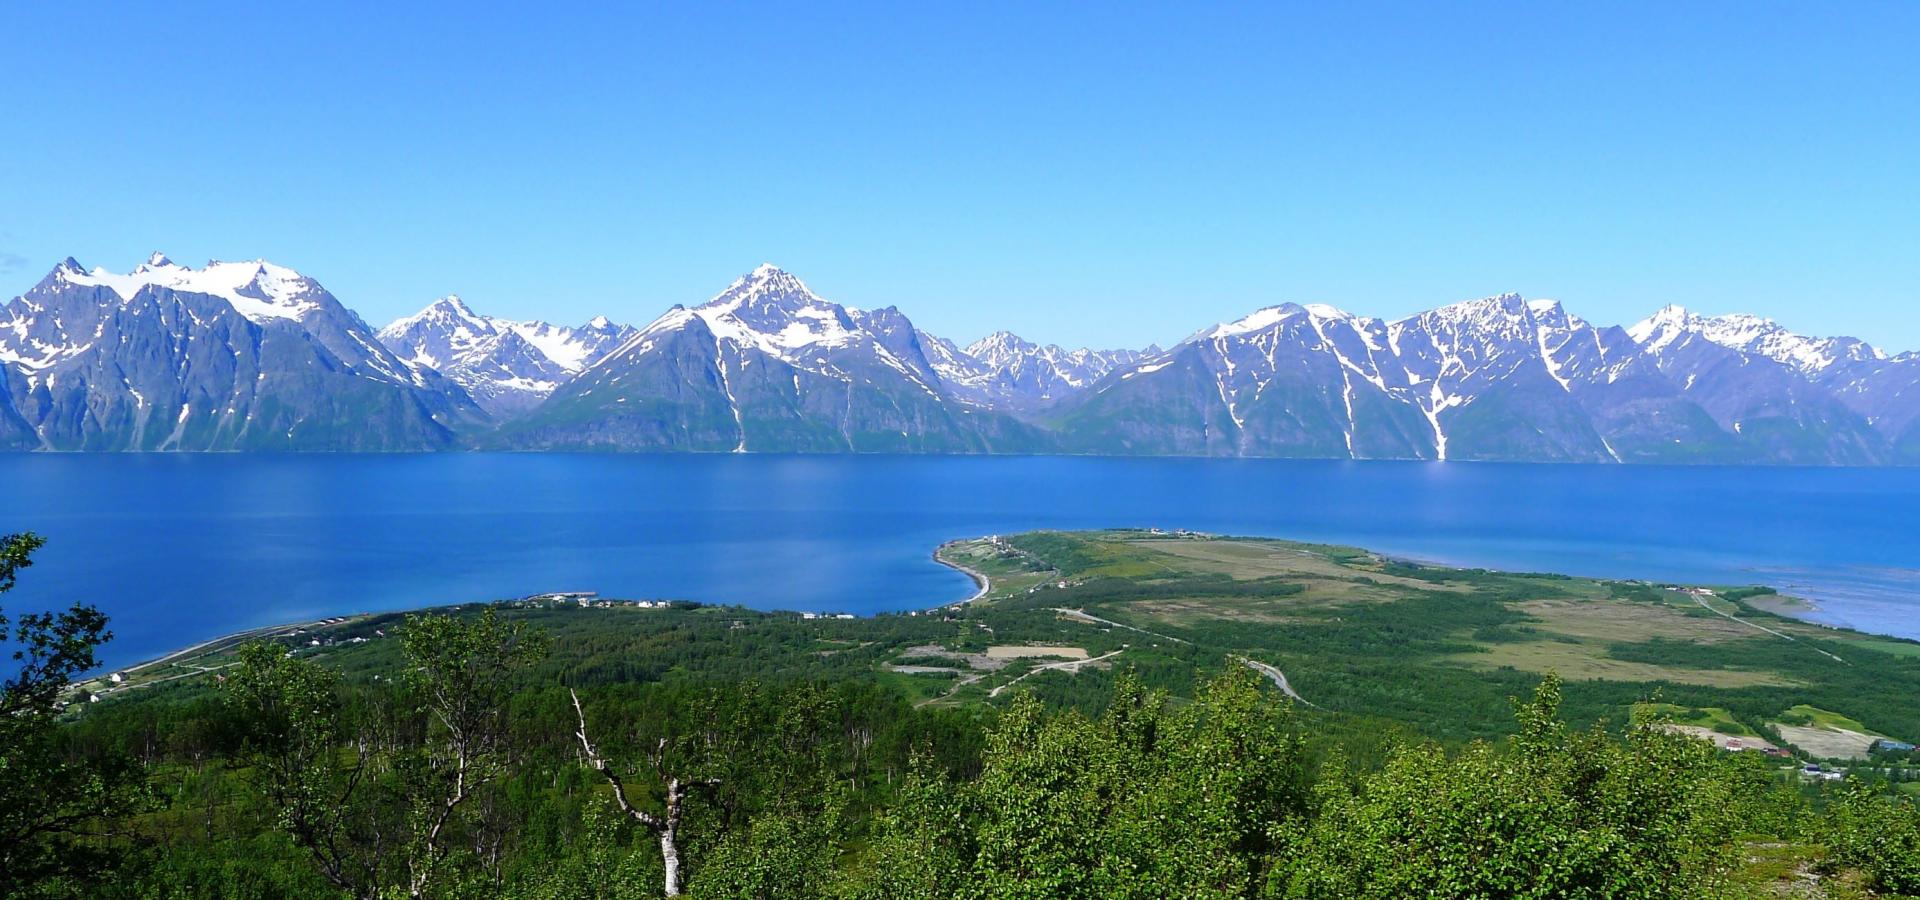 View of the peninsula Spåkenes from above, the Lyngenfjord and the Lyngen Alps in the background